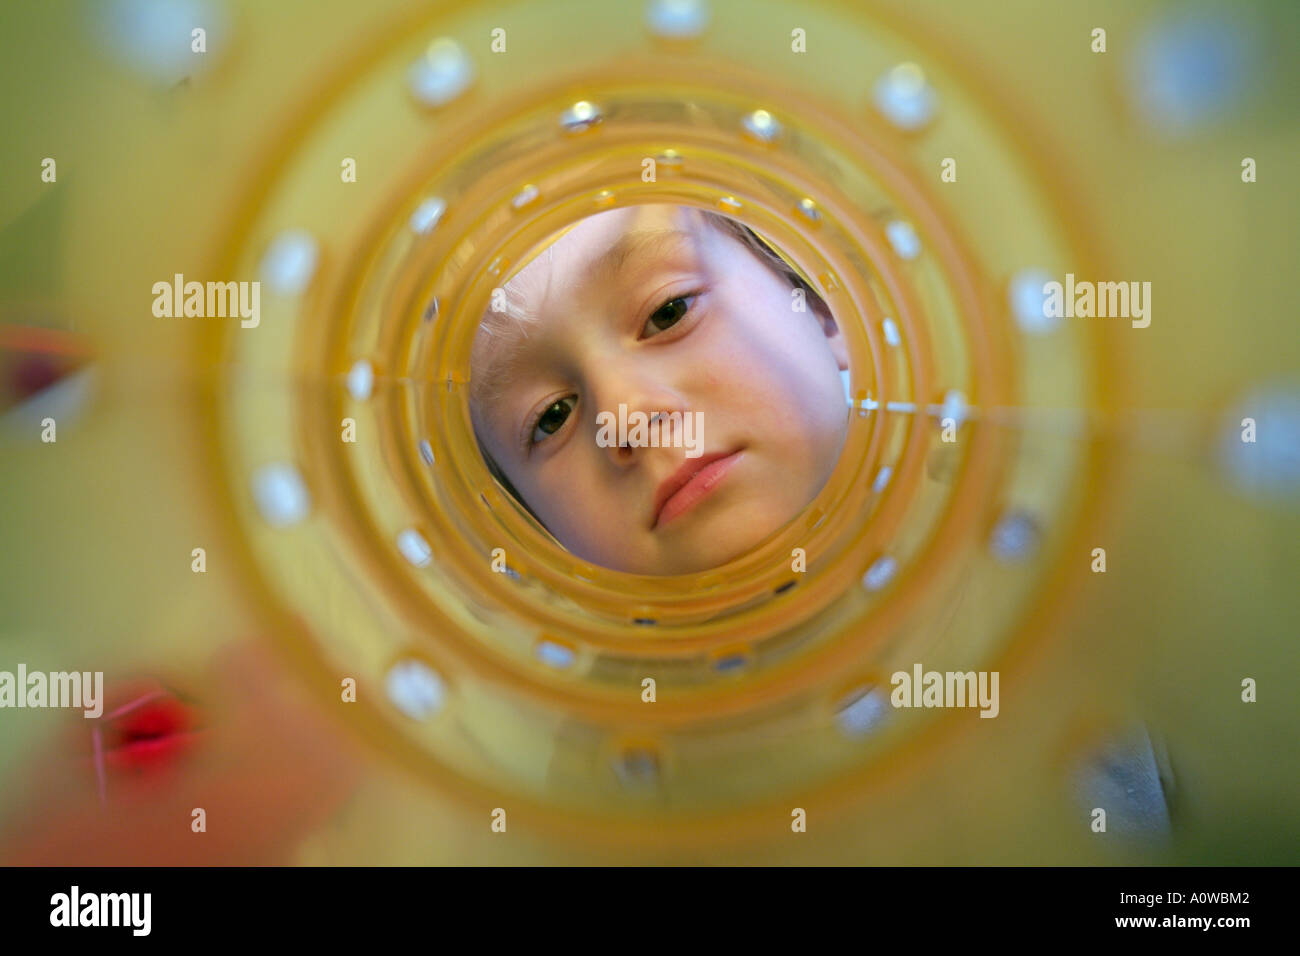 Young girl looking through her yellow plastic toy. Stock Photo